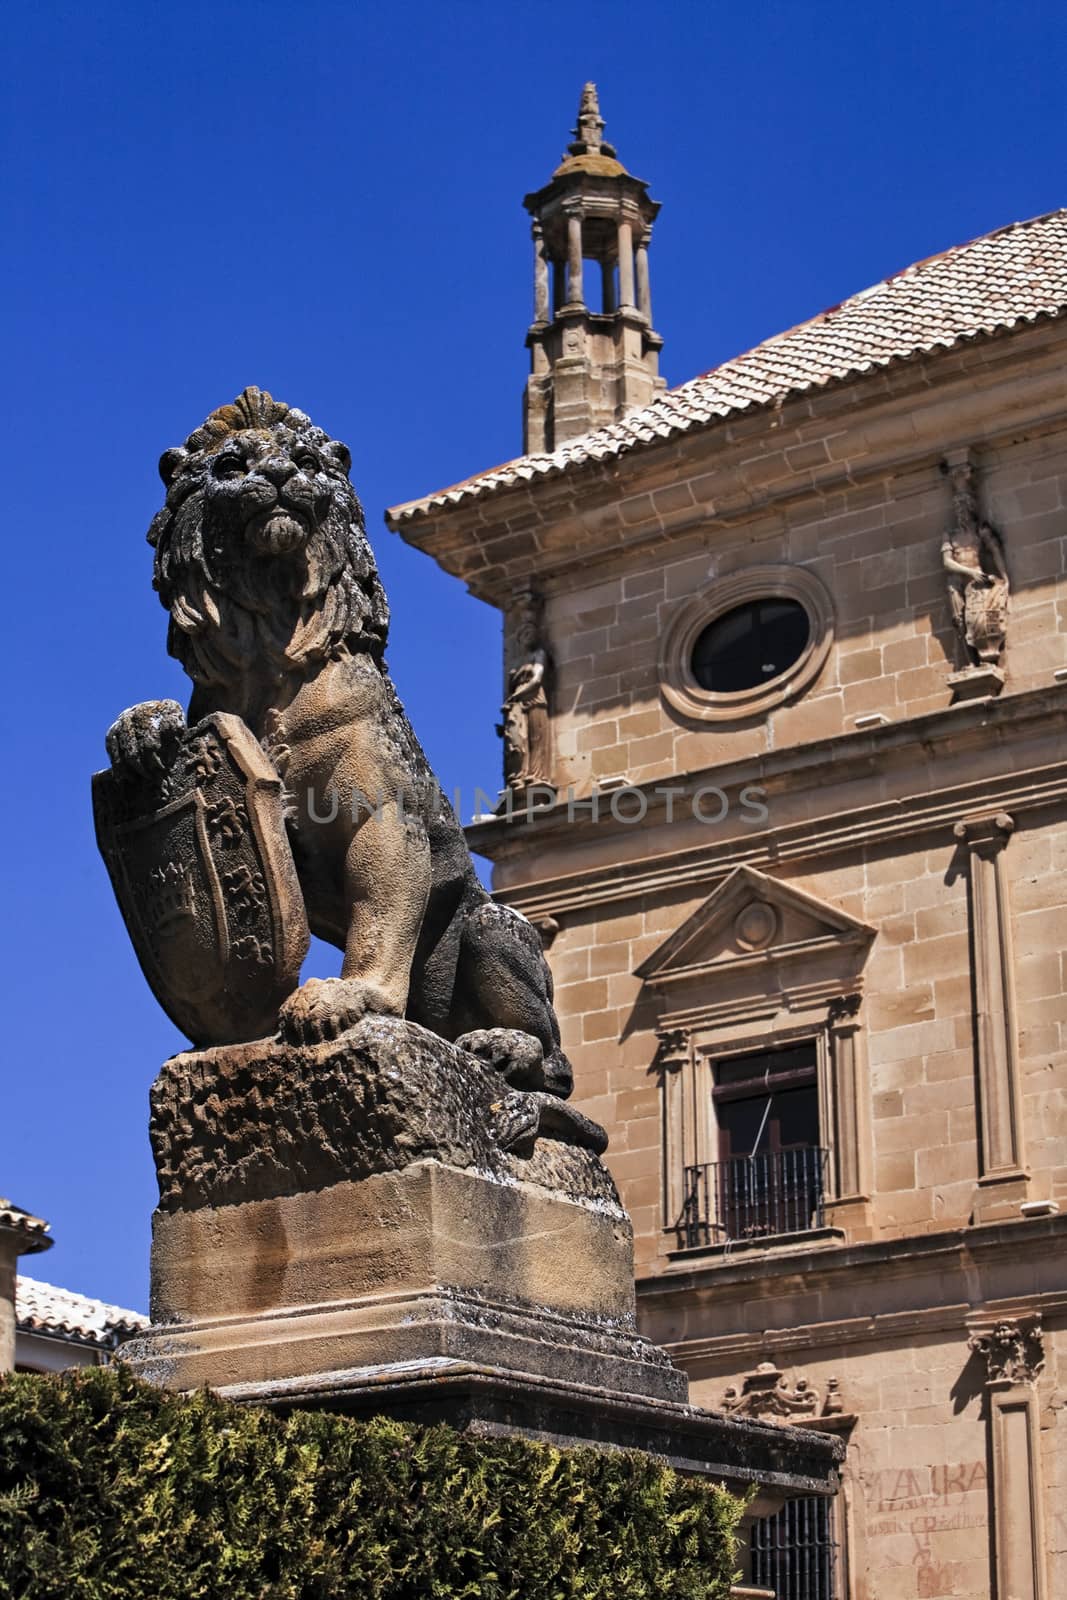 Lion statue with shield at Ubeda city, Jaen province, Andalusia, Spain